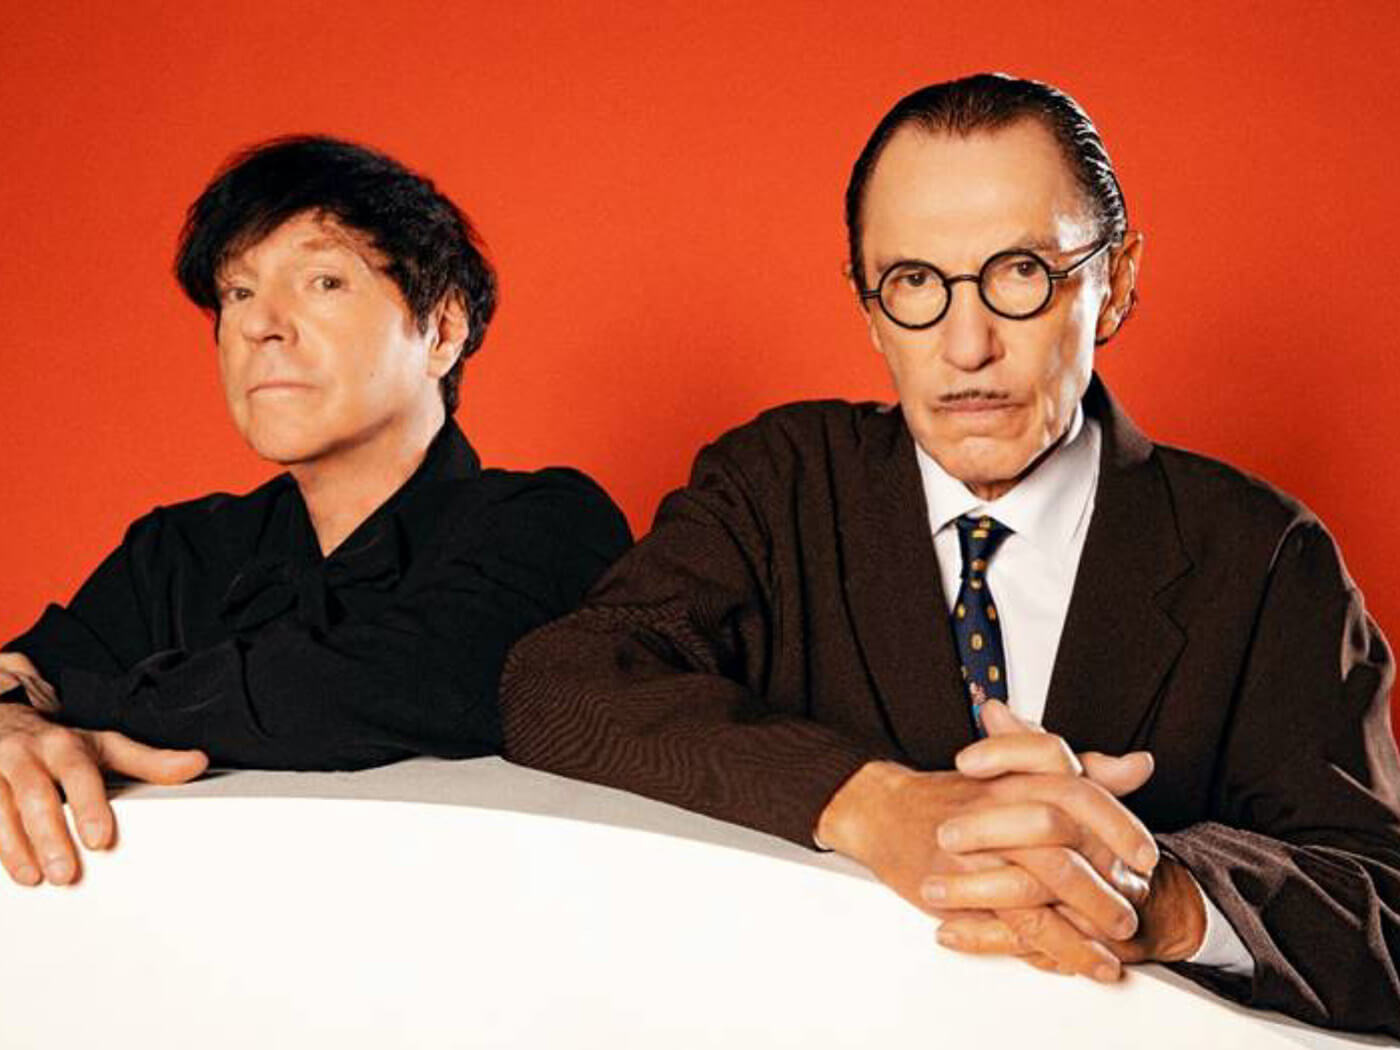 Sparks re-sign to Island Records for new album The Girl Is Crying In Her Latte